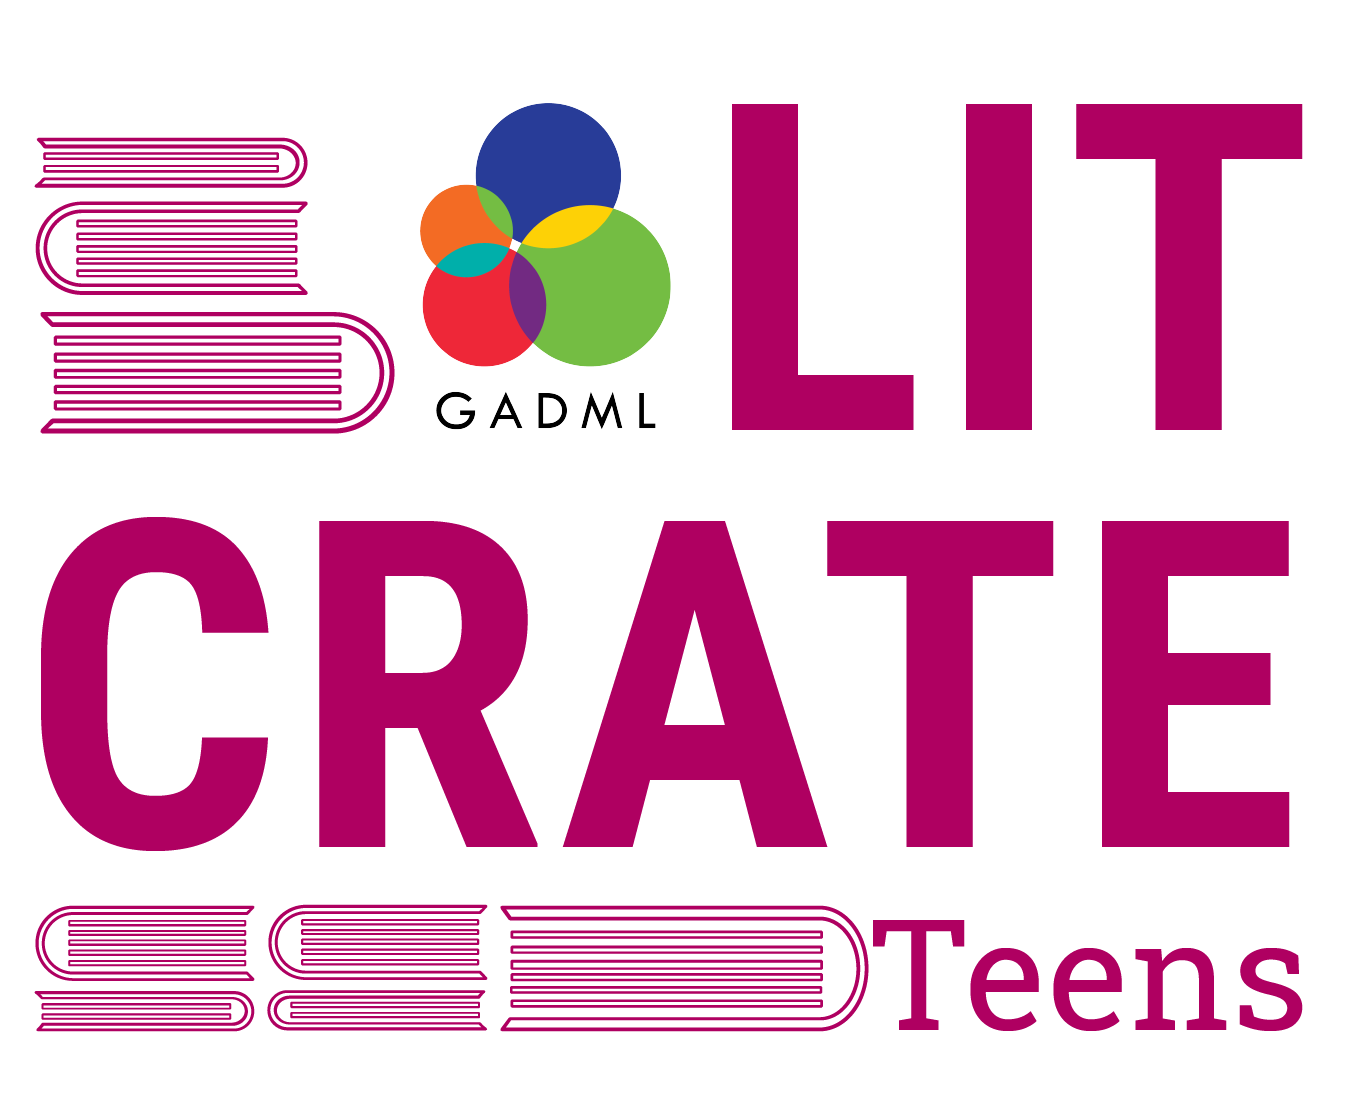 Teen Lit Crates logo consisting of GADML logo and the words "Lit Crate Teens" in purple with book icons